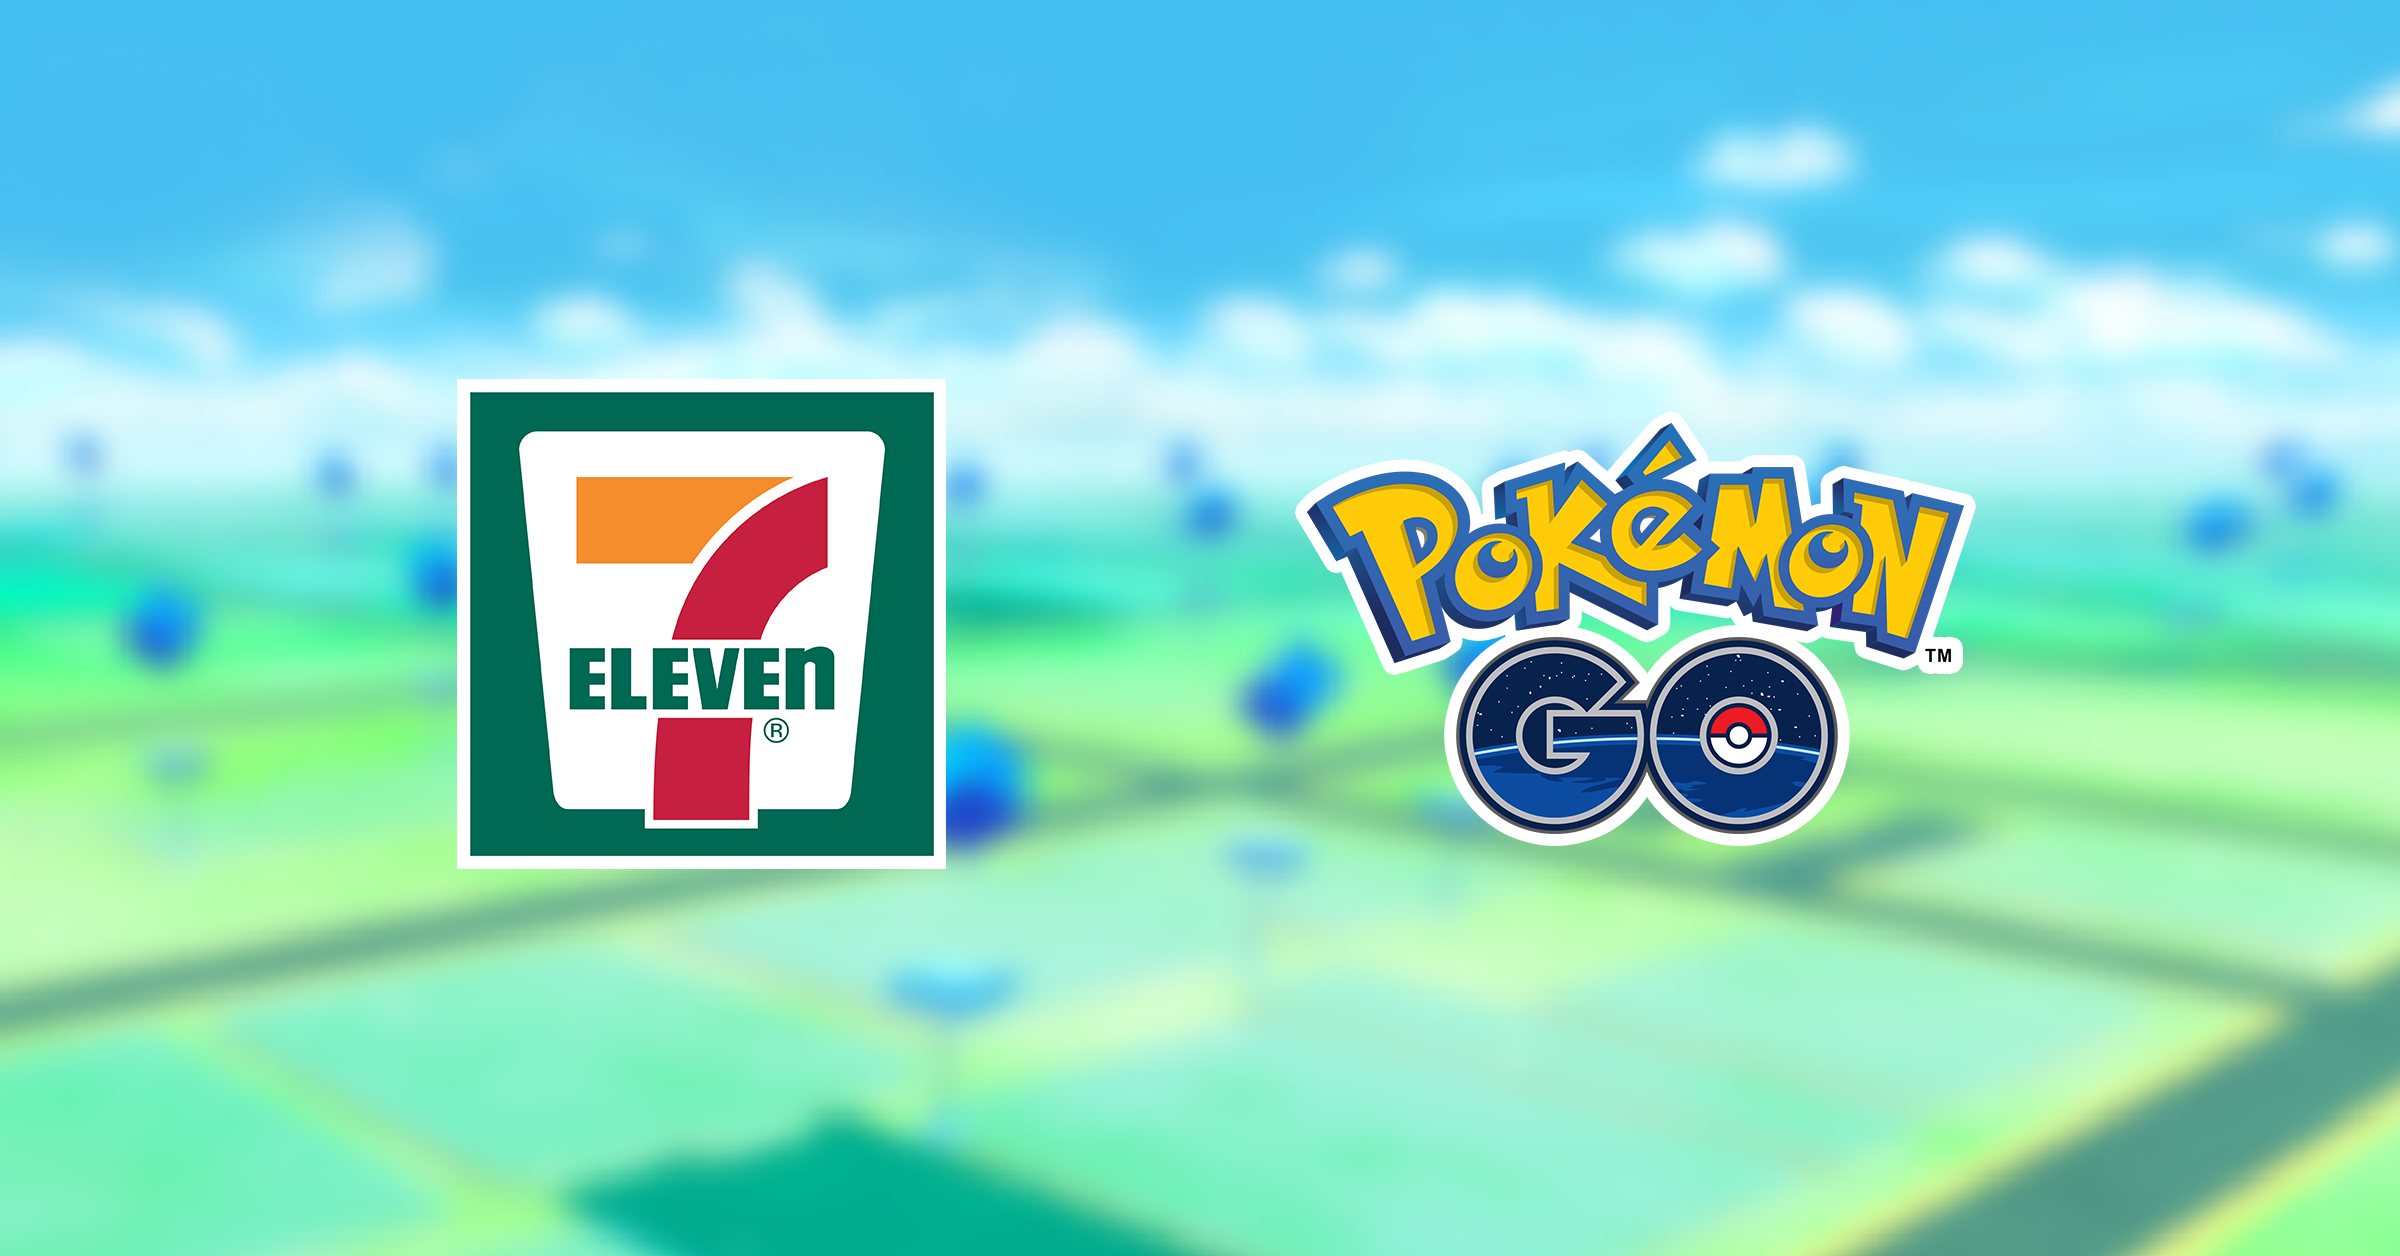 Legendary Day Event Teased As A Part Of The Mexican 7 Eleven Partnership. Pokemon GO Hub